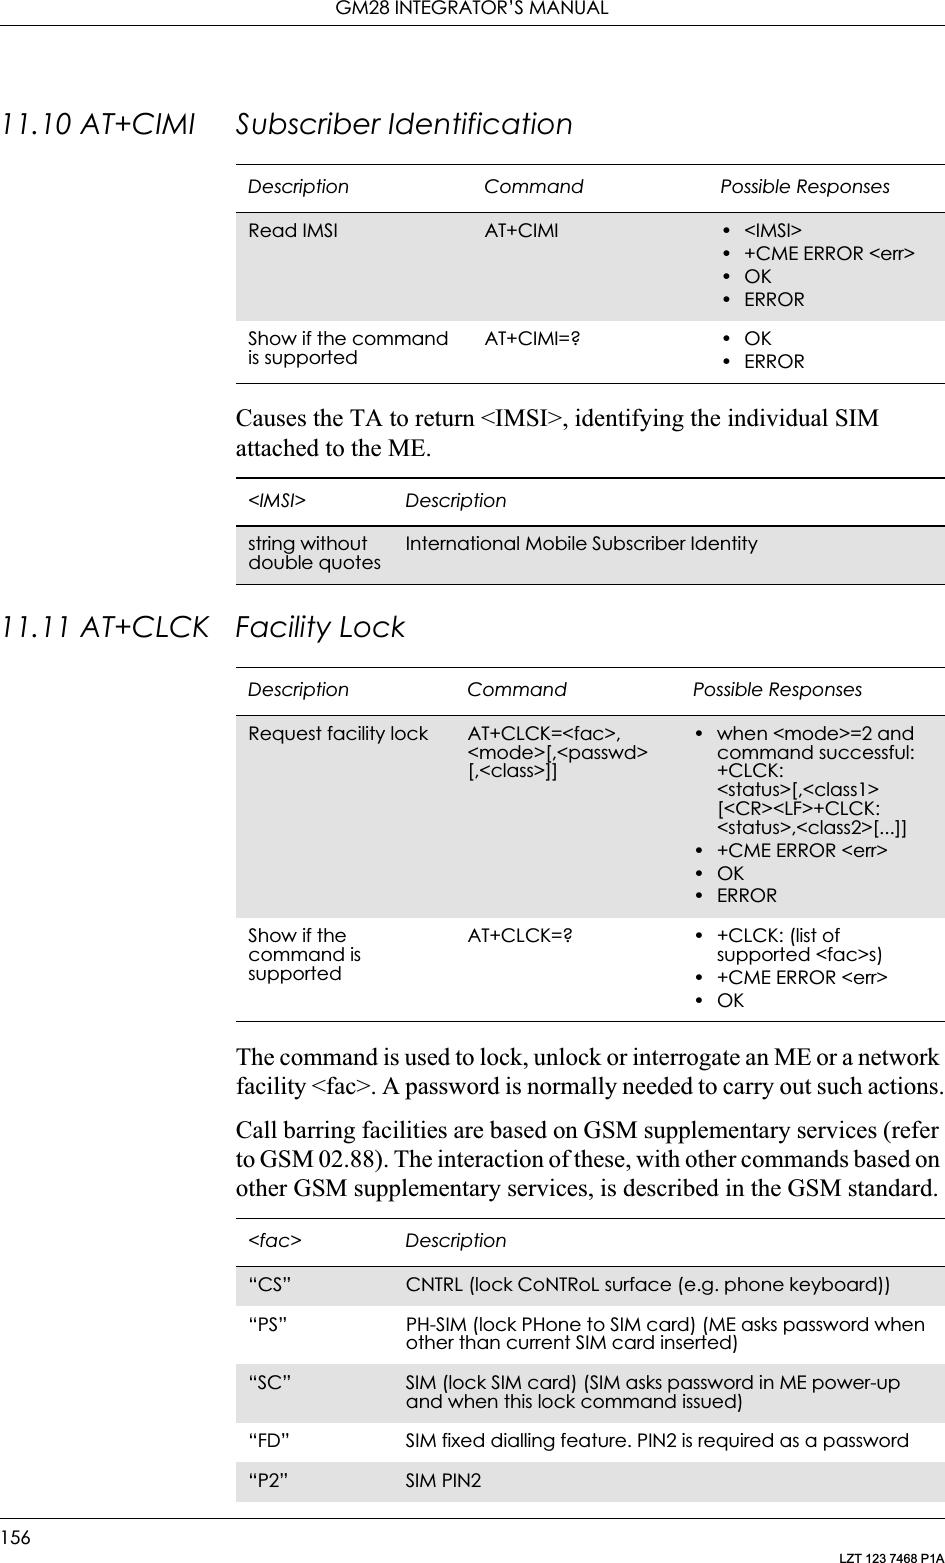 GM28 INTEGRATOR’S MANUAL156LZT 123 7468 P1A11.10 AT+CIMI Subscriber IdentificationCauses the TA to return &lt;IMSI&gt;, identifying the individual SIM attached to the ME.11.11 AT+CLCK Facility LockThe command is used to lock, unlock or interrogate an ME or a network facility &lt;fac&gt;. A password is normally needed to carry out such actions.Call barring facilities are based on GSM supplementary services (refer to GSM 02.88). The interaction of these, with other commands based on other GSM supplementary services, is described in the GSM standard.Description Command Possible ResponsesRead IMSI AT+CIMI •&lt;IMSI&gt;•+CME ERROR &lt;err&gt;•OK•ERRORShow if the command is supportedAT+CIMI=? • OK•ERROR&lt;IMSI&gt; Descriptionstring without double quotesInternational Mobile Subscriber IdentityDescription Command Possible ResponsesRequest facility lock AT+CLCK=&lt;fac&gt;, &lt;mode&gt;[,&lt;passwd&gt; [,&lt;class&gt;]]• when &lt;mode&gt;=2 and command successful: +CLCK: &lt;status&gt;[,&lt;class1&gt; [&lt;CR&gt;&lt;LF&gt;+CLCK: &lt;status&gt;,&lt;class2&gt;[...]]• +CME ERROR &lt;err&gt;•OK•ERRORShow if the command is supportedAT+CLCK=? • +CLCK: (list of supported &lt;fac&gt;s)• +CME ERROR &lt;err&gt;•OK&lt;fac&gt; Description“CS” CNTRL (lock CoNTRoL surface (e.g. phone keyboard))“PS” PH-SIM (lock PHone to SIM card) (ME asks password when other than current SIM card inserted)“SC” SIM (lock SIM card) (SIM asks password in ME power-up and when this lock command issued)“FD” SIM fixed dialling feature. PIN2 is required as a password“P2” SIM PIN2